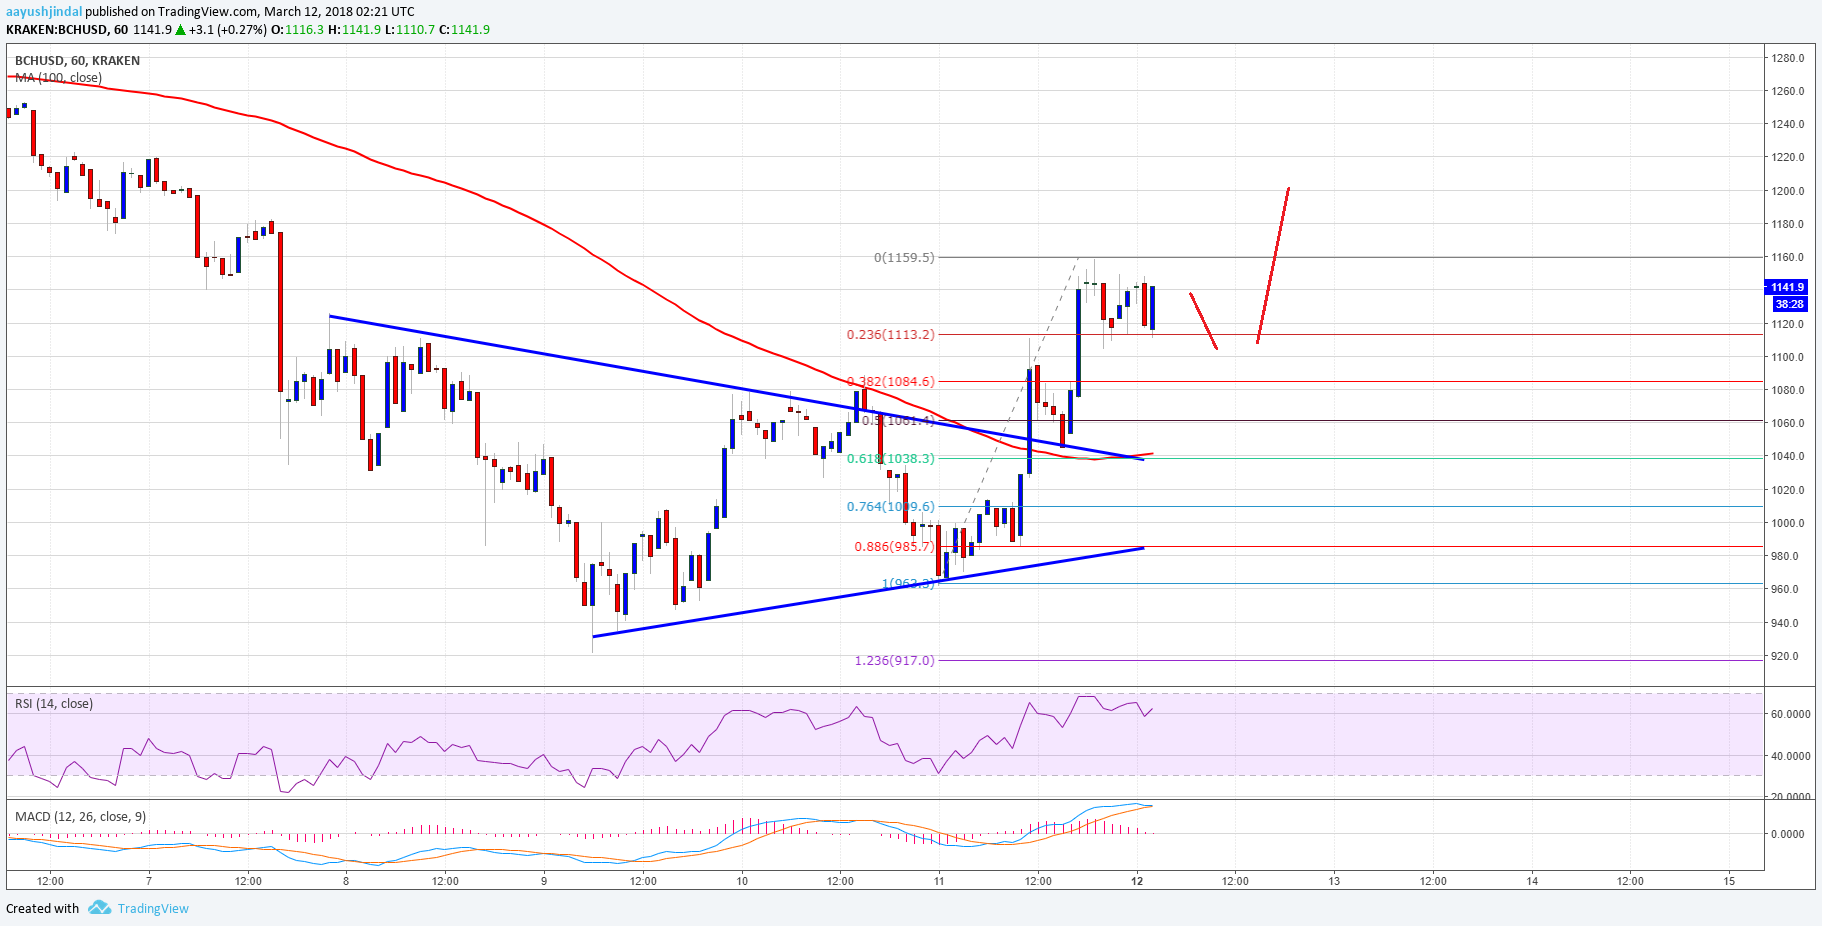 Bitcoin Cash Price Technical Analysis – BCH/USD to Trade Higher